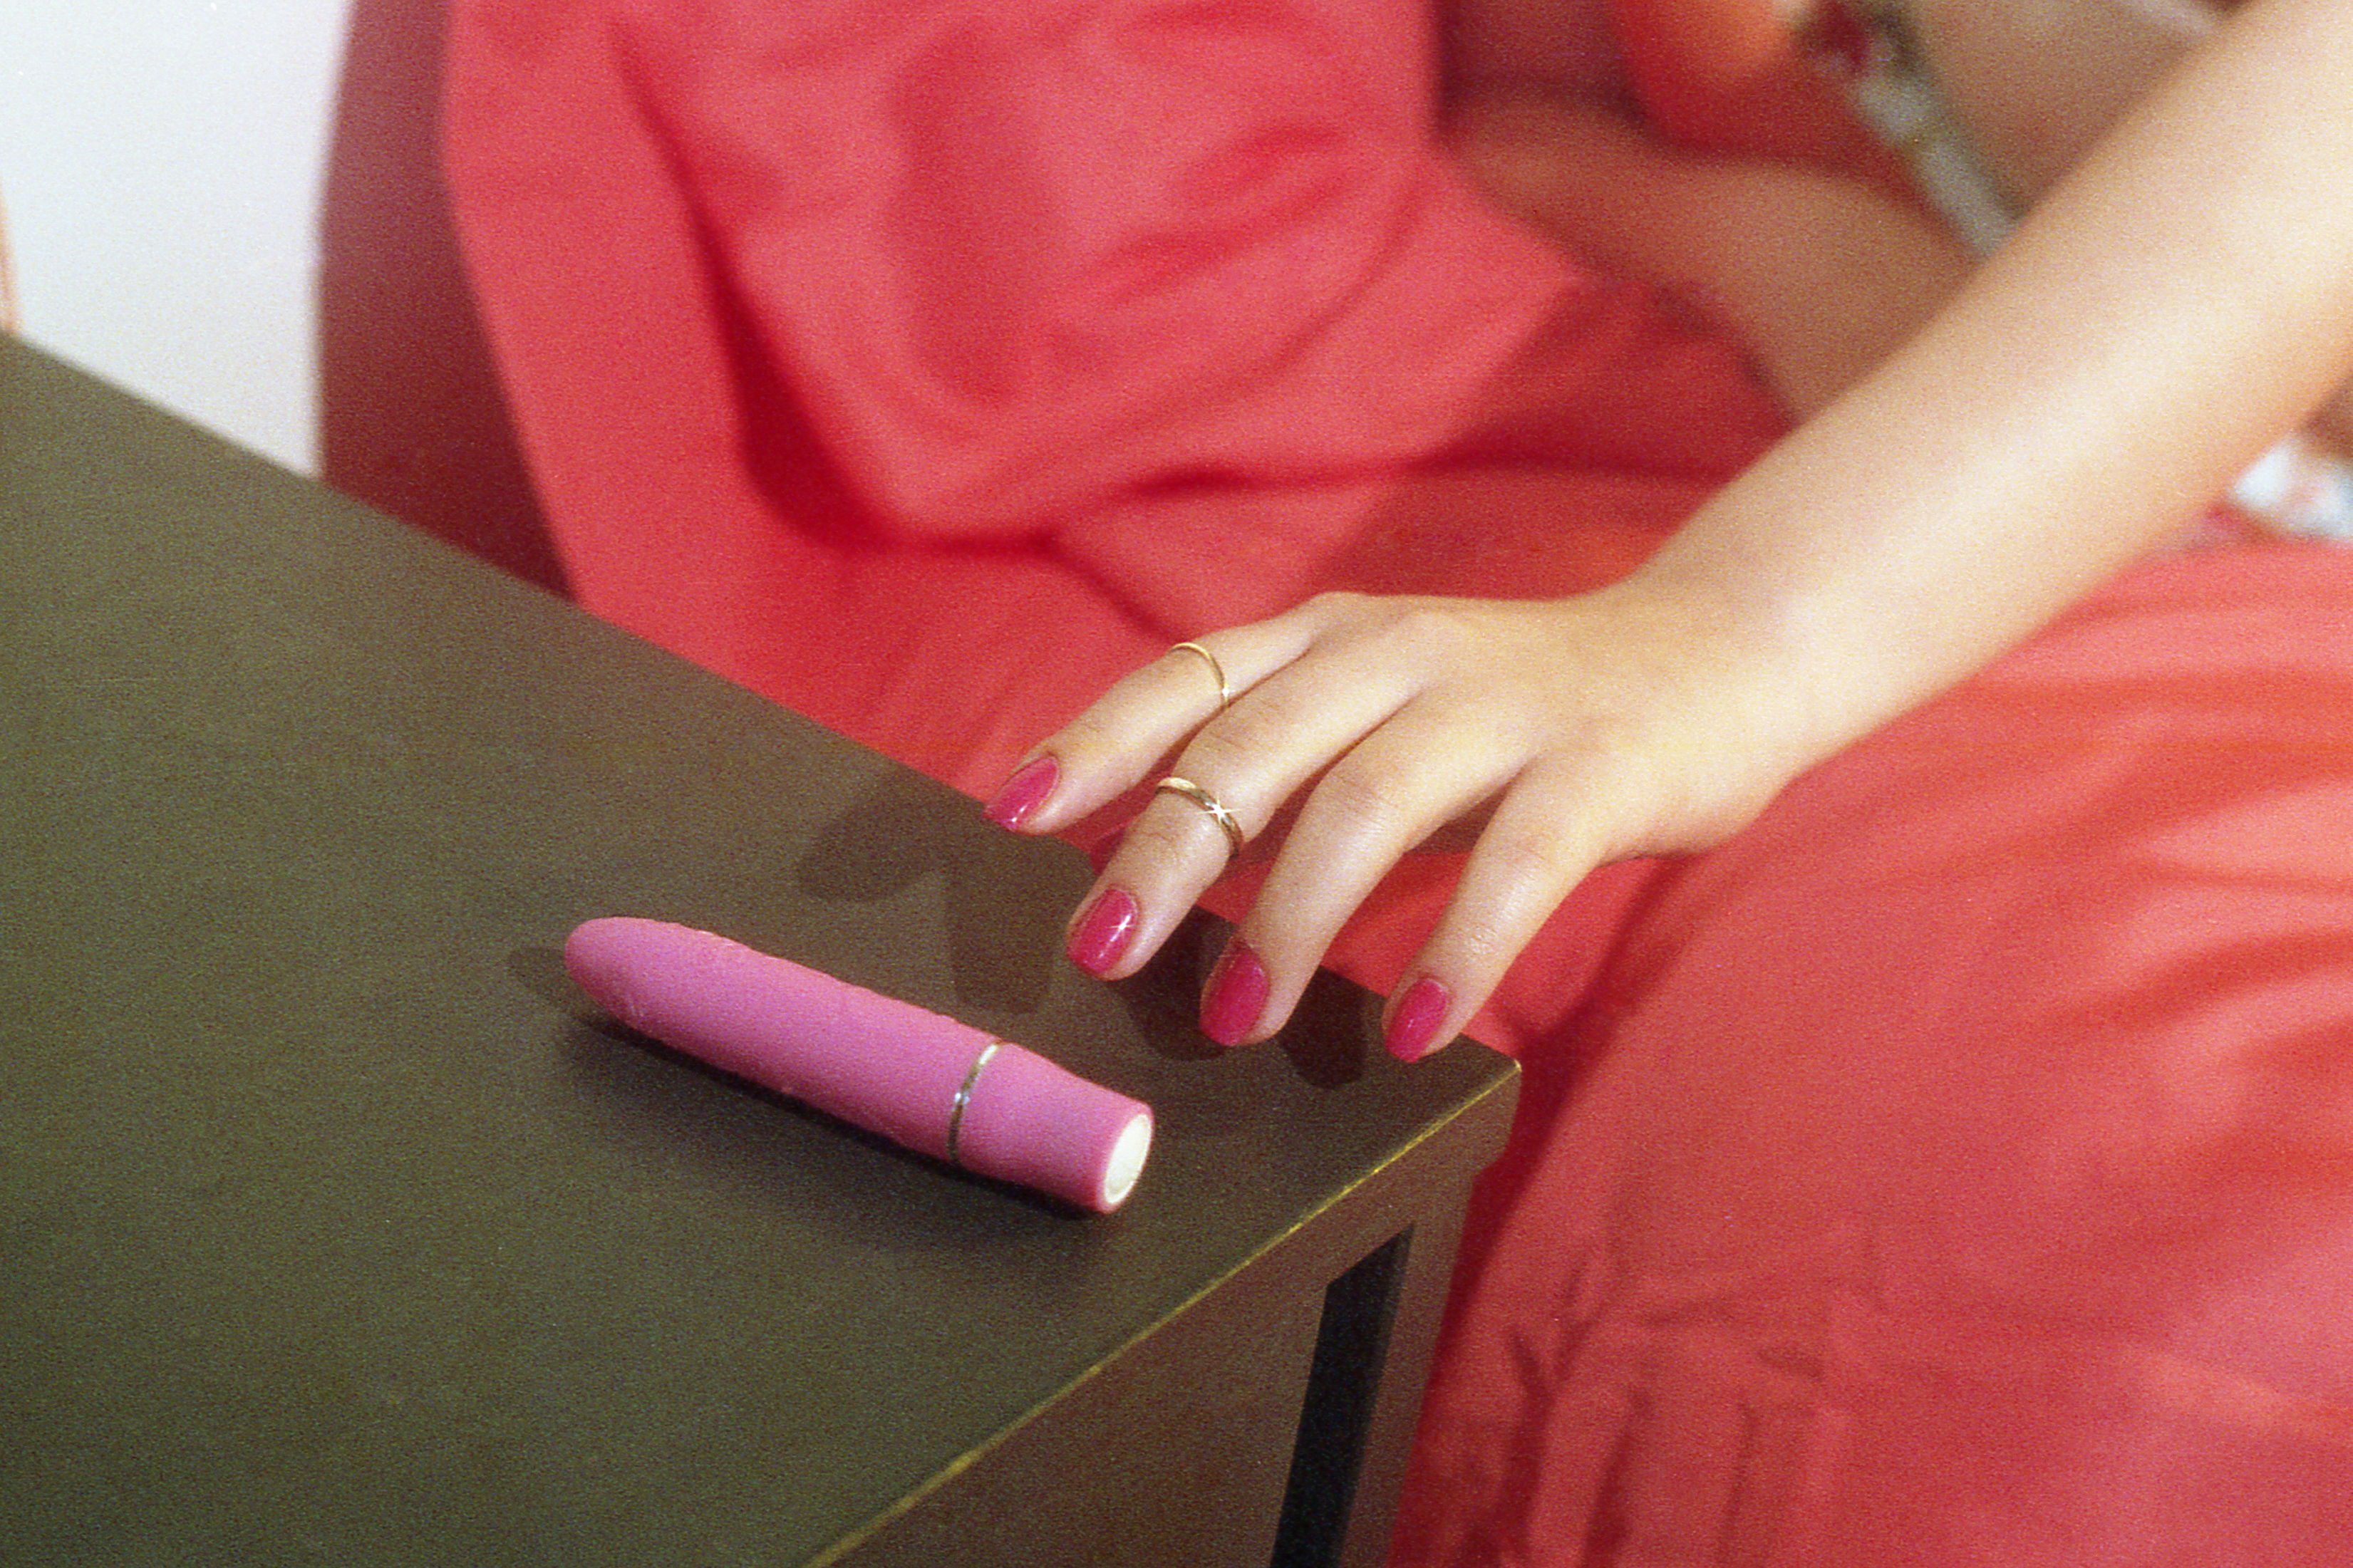 Person&#x27;s hand near a personal massager on a table, indicating a topic on sexual wellness or pleasure